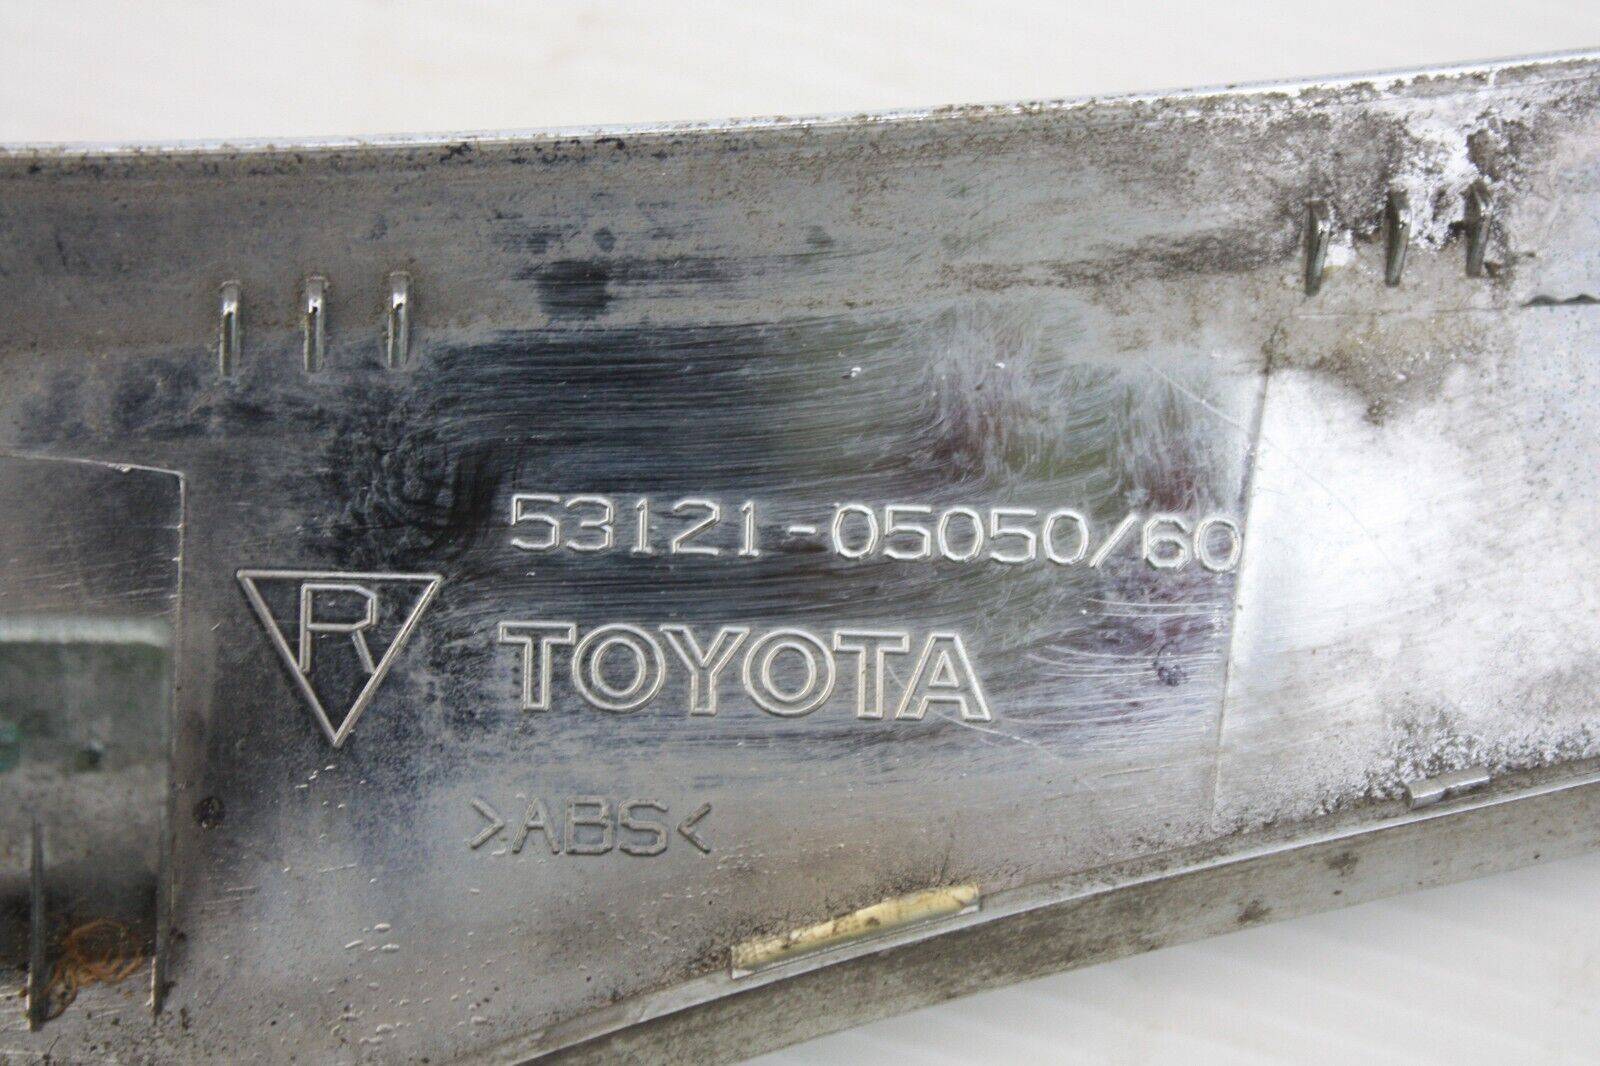 Toyota-Avensis-Front-Bumper-Chrome-53121-05050-Genuine-FIXING-DAMAGED-175674336026-6